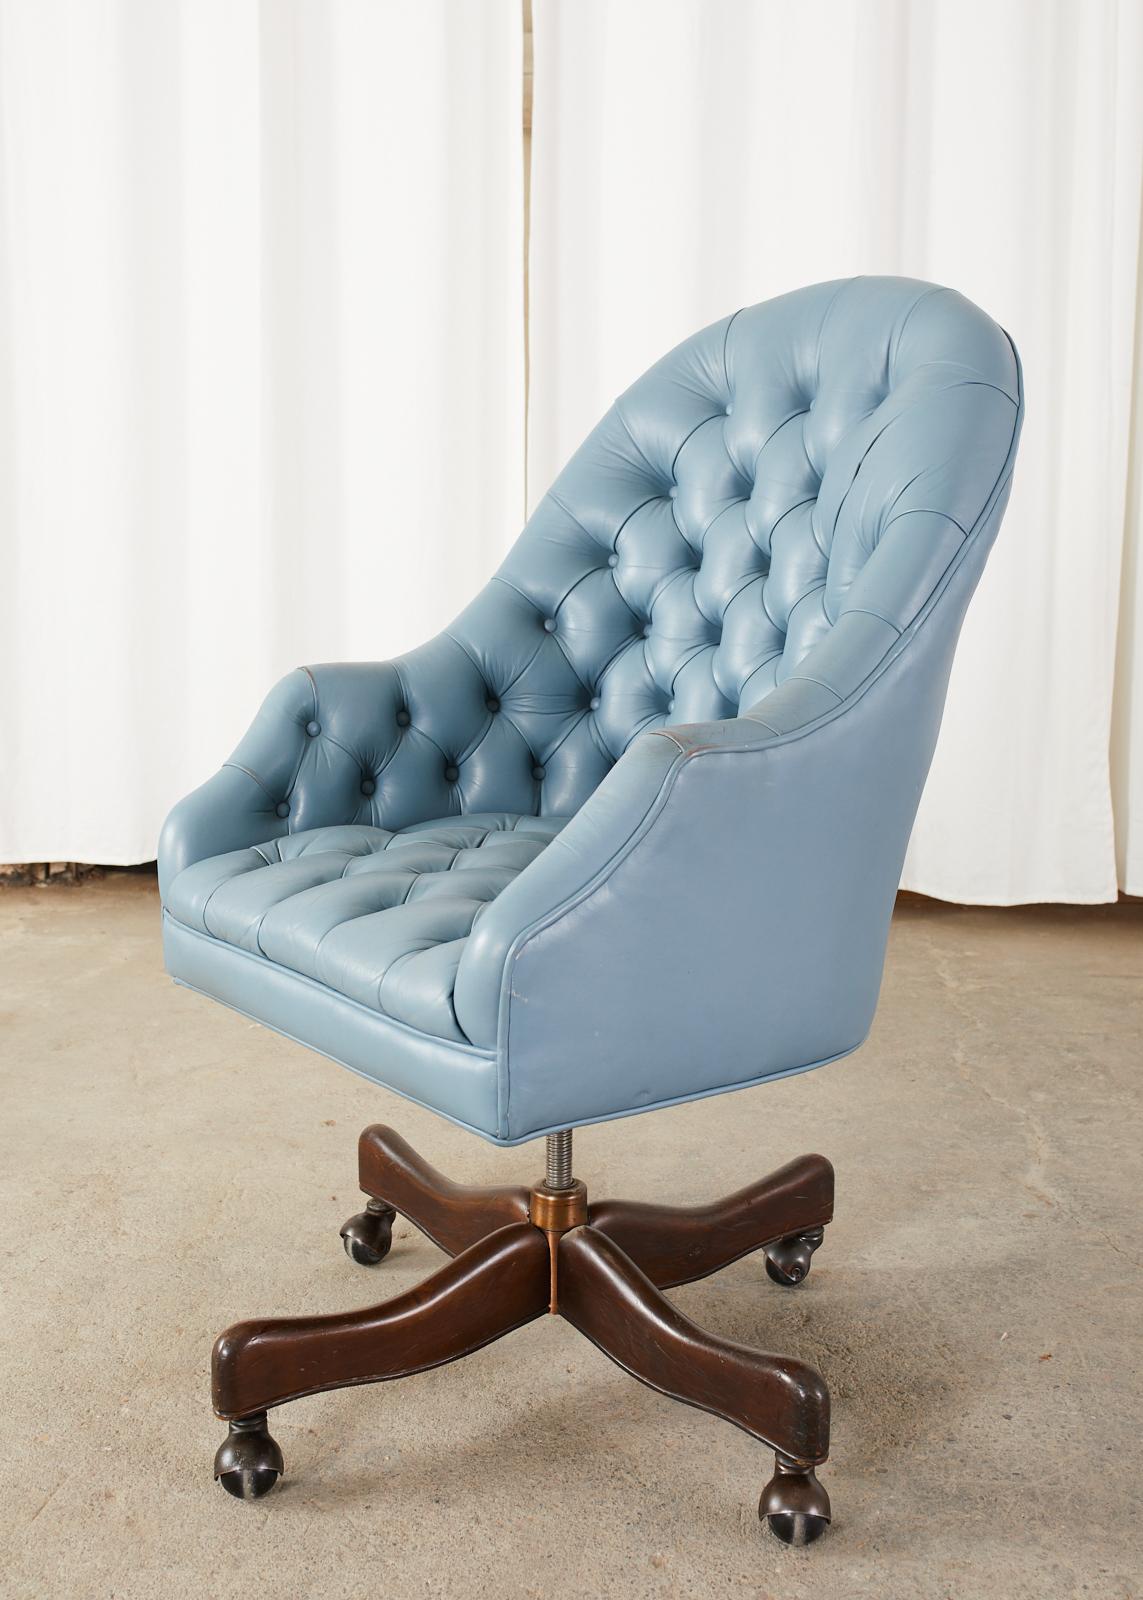 Fabulous mid-century executive office swivel desk chair featuring attractive French blue leather upholstery. Made in the English chesterfield style with a button tufted seat and back. Supported by an adjustable column conjoined to four mahogany legs